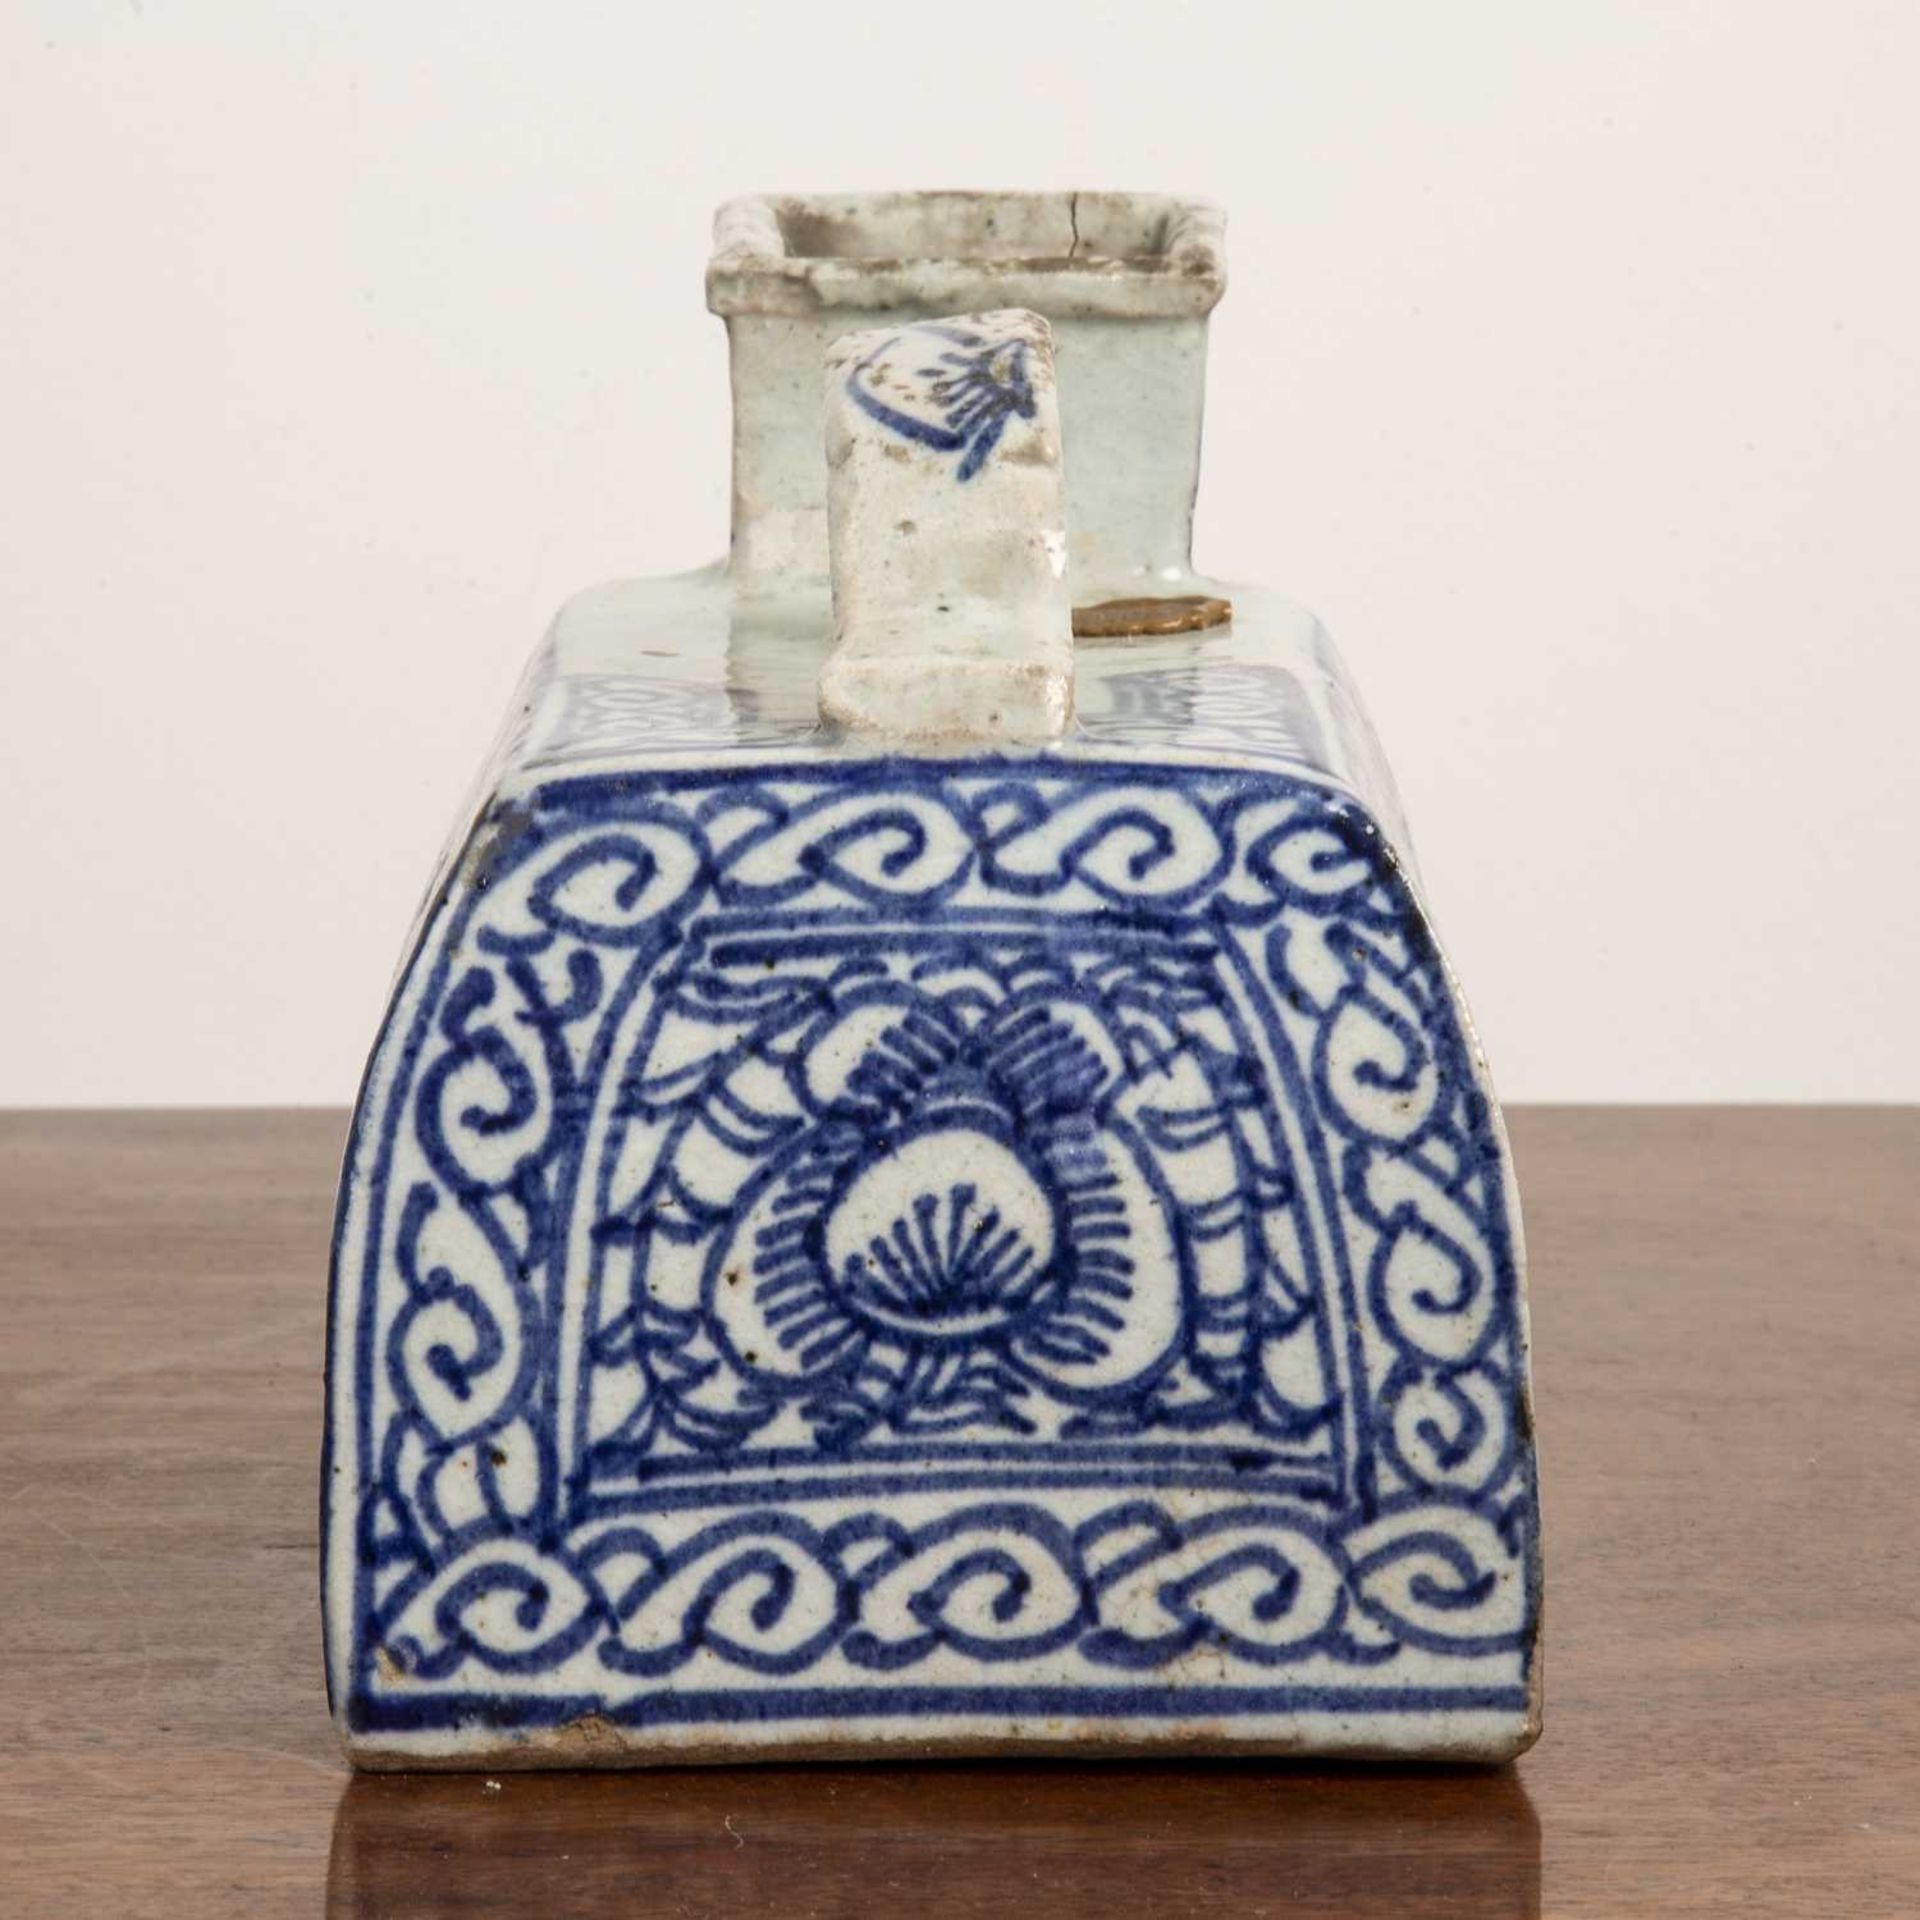 Blue and white porcelain bourdaloue Chinese, decorated with repeating blue and white motifs, with - Image 3 of 6